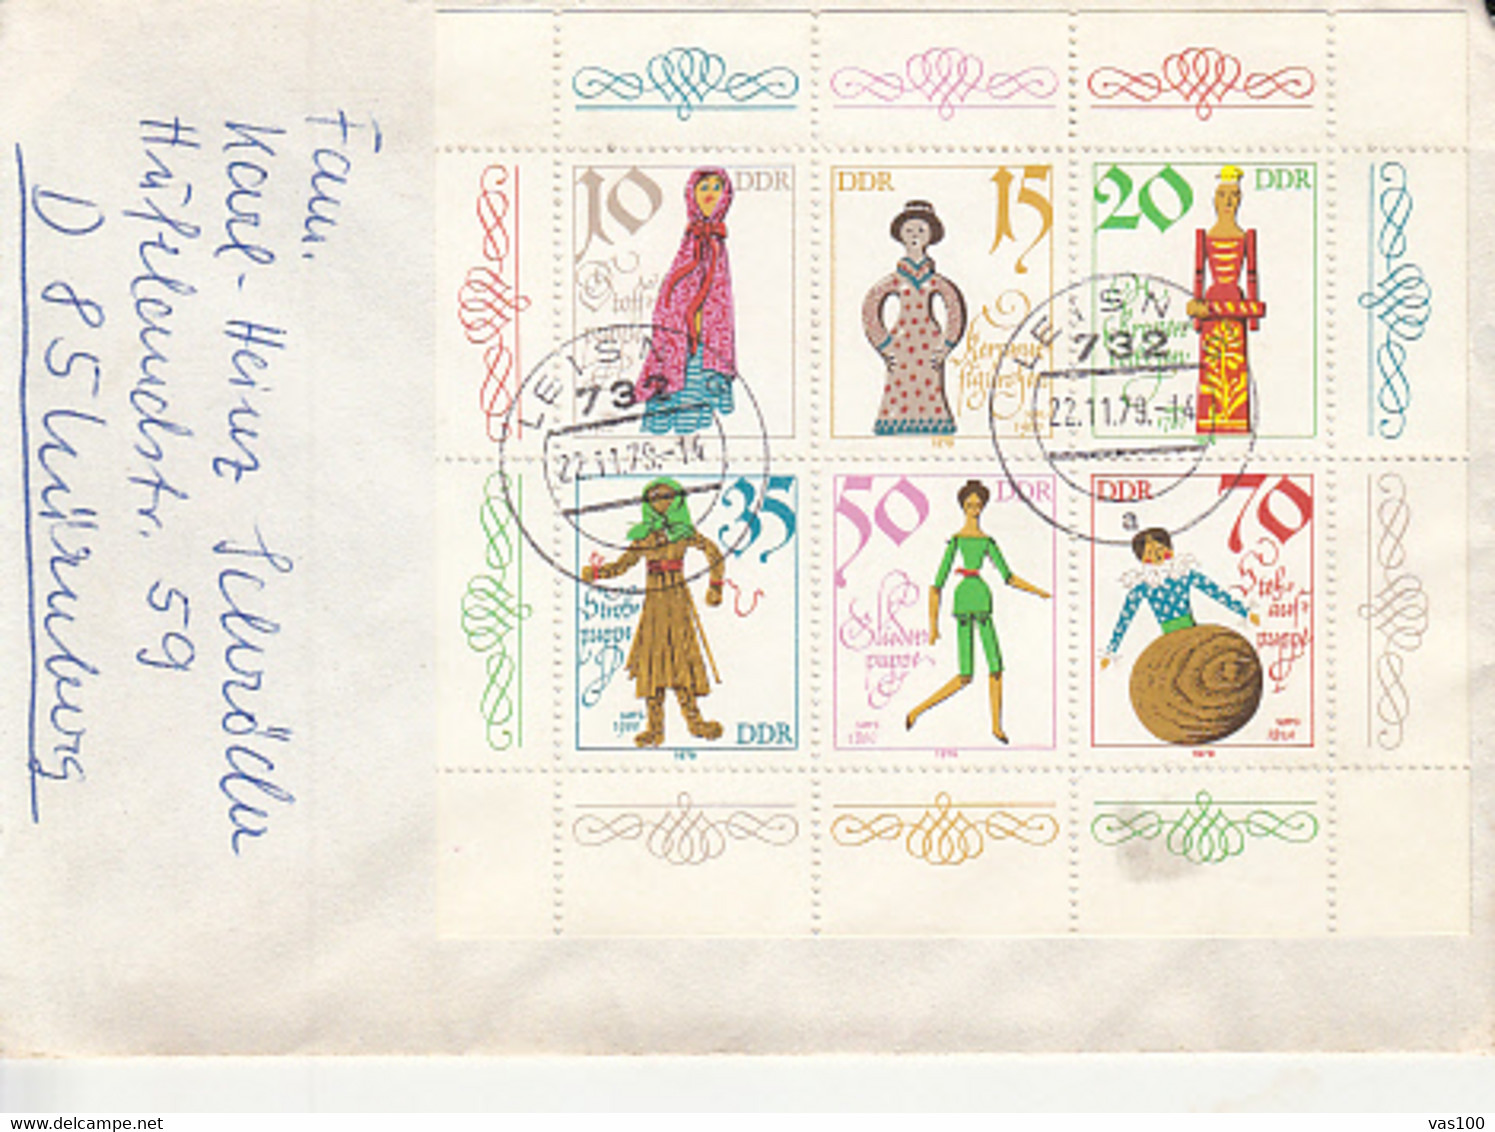 CHILDRENS, PUPPETS, STAMPS ON COVER, 1979, GERMANY - Marionnettes